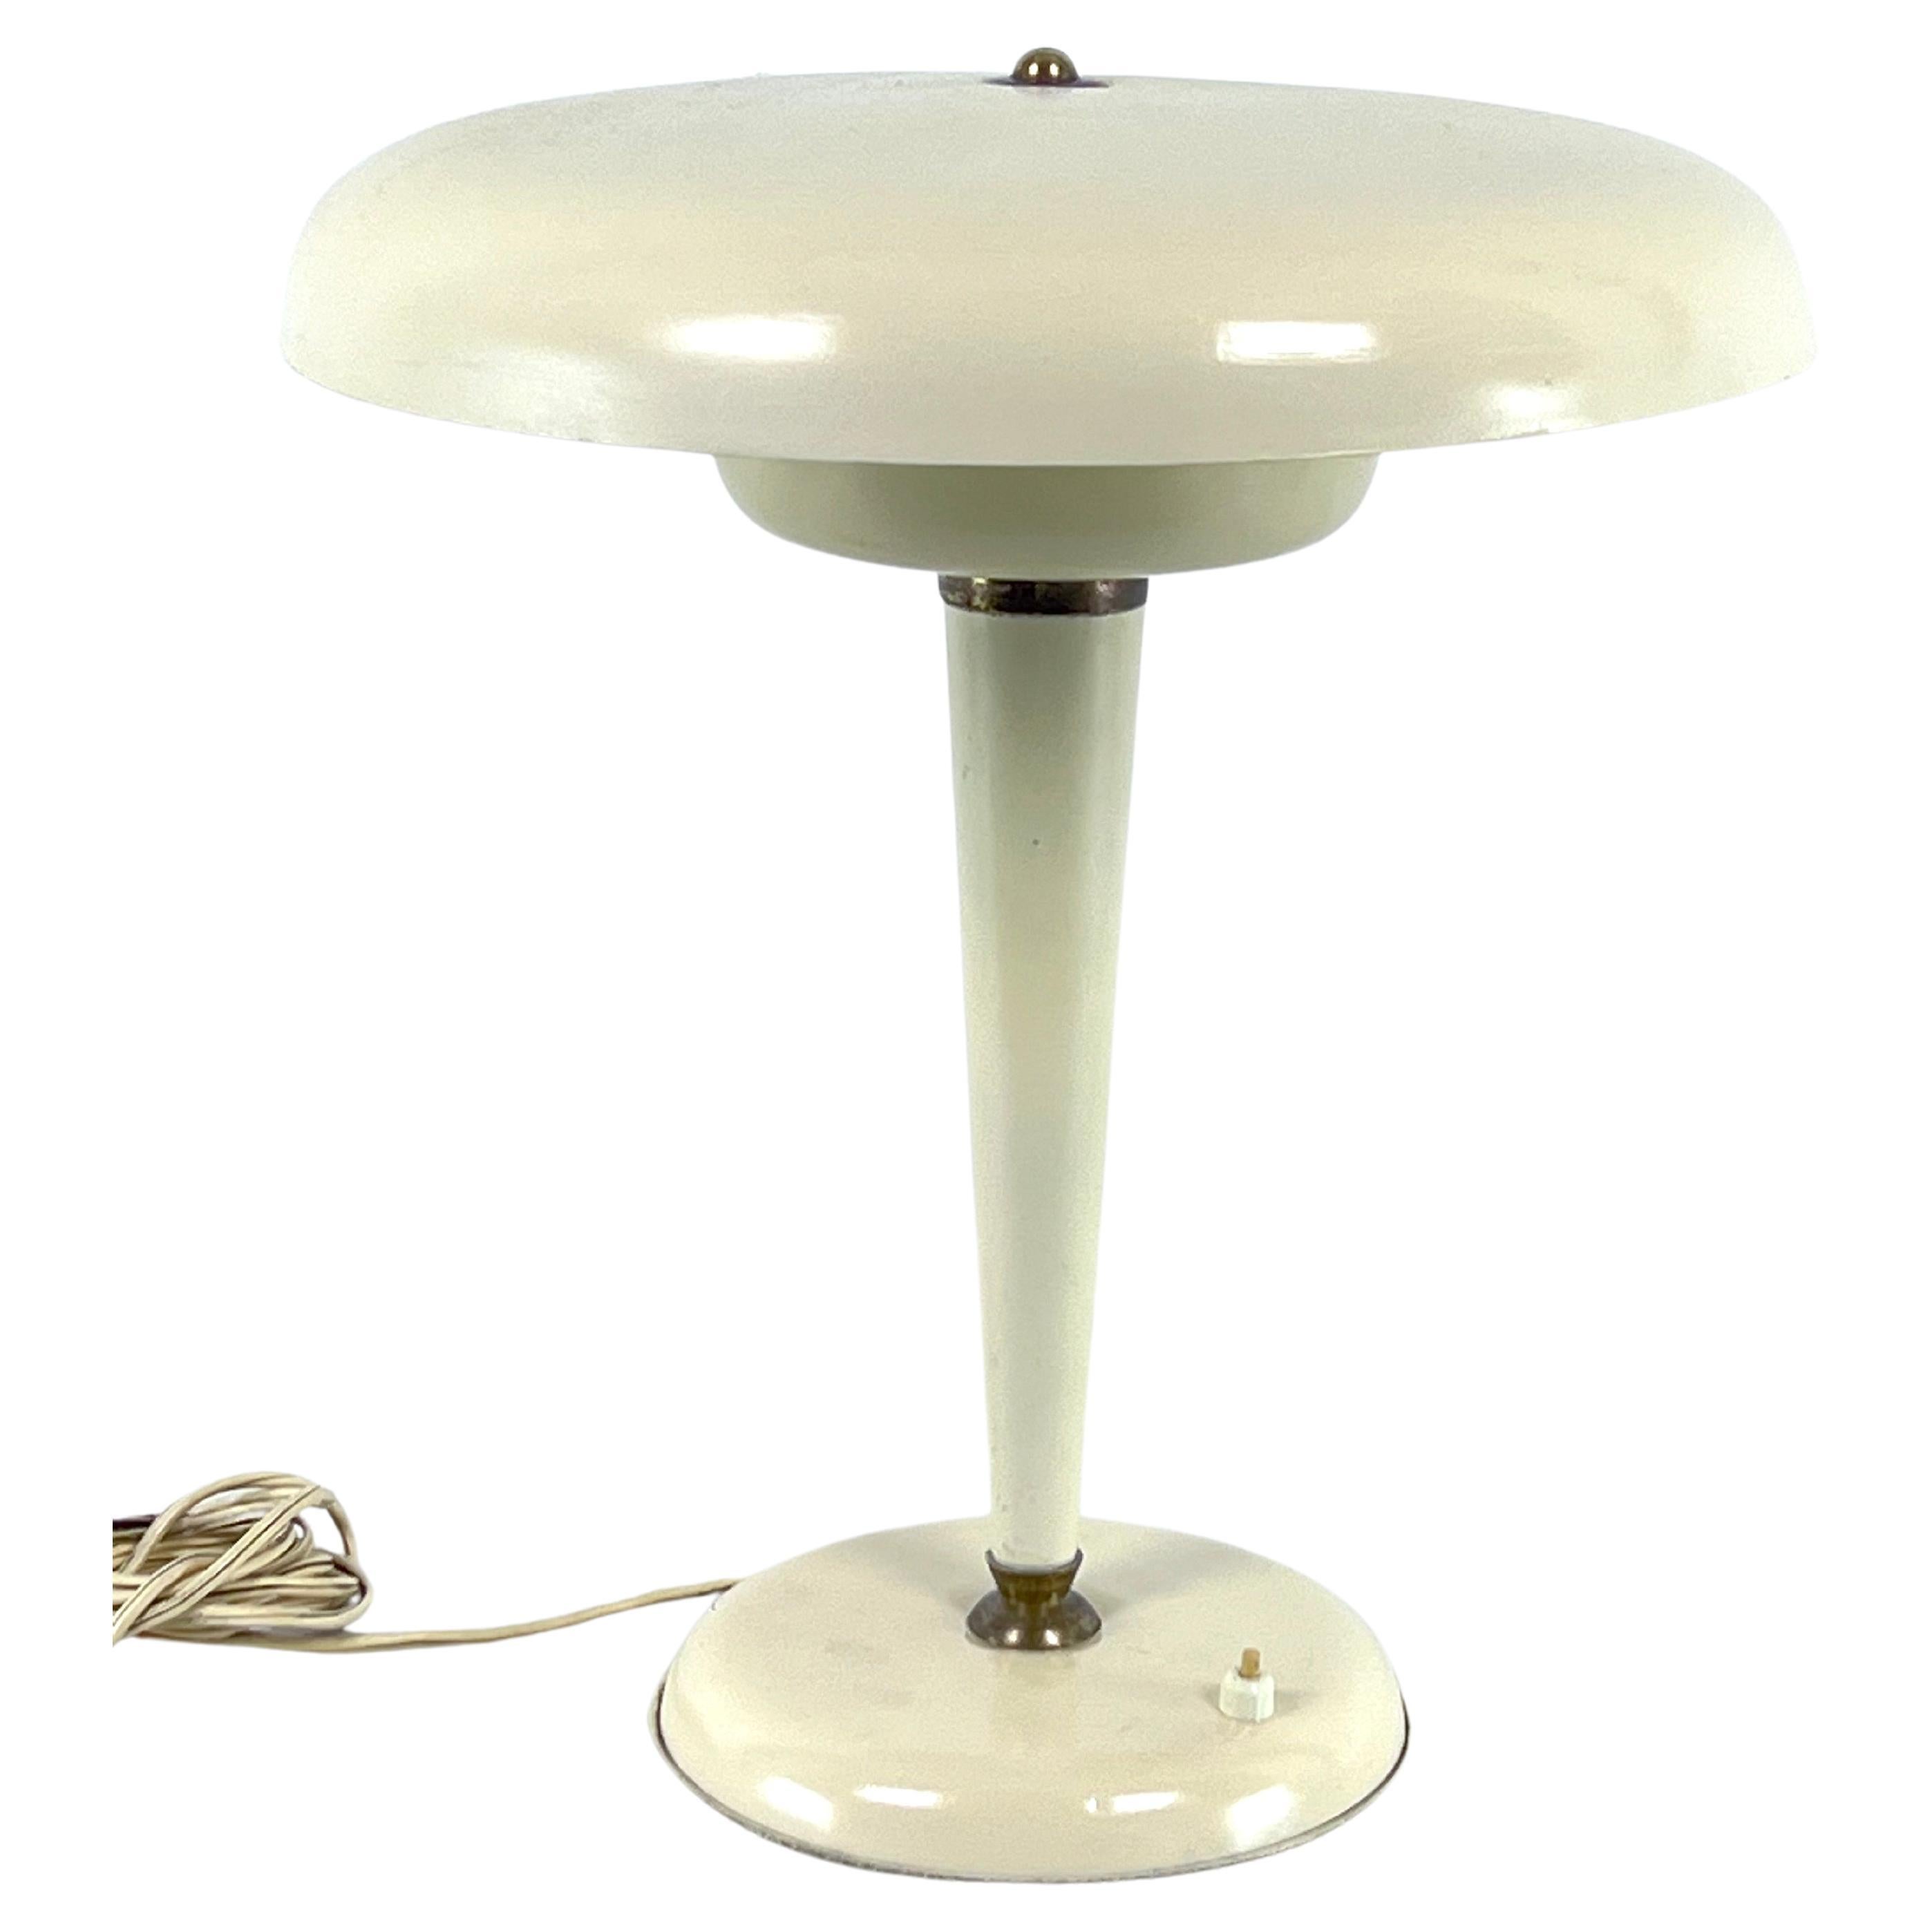 Midcentury Italian Ministerial Desk Lamp in Brass and Ivory Lacquer, Italy, 1950